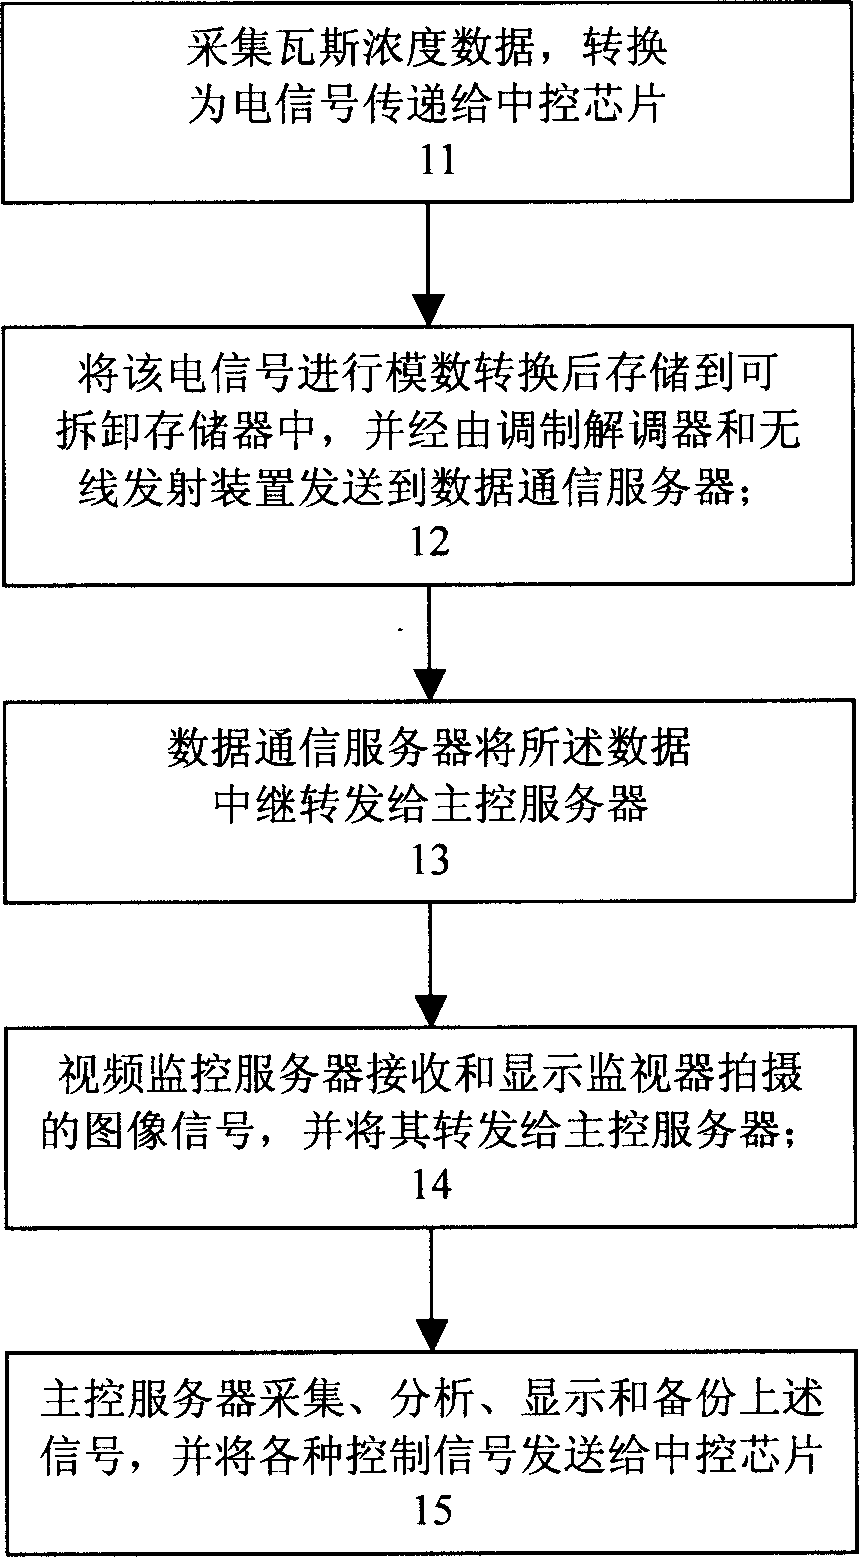 Method and system for monitoring gas in mine